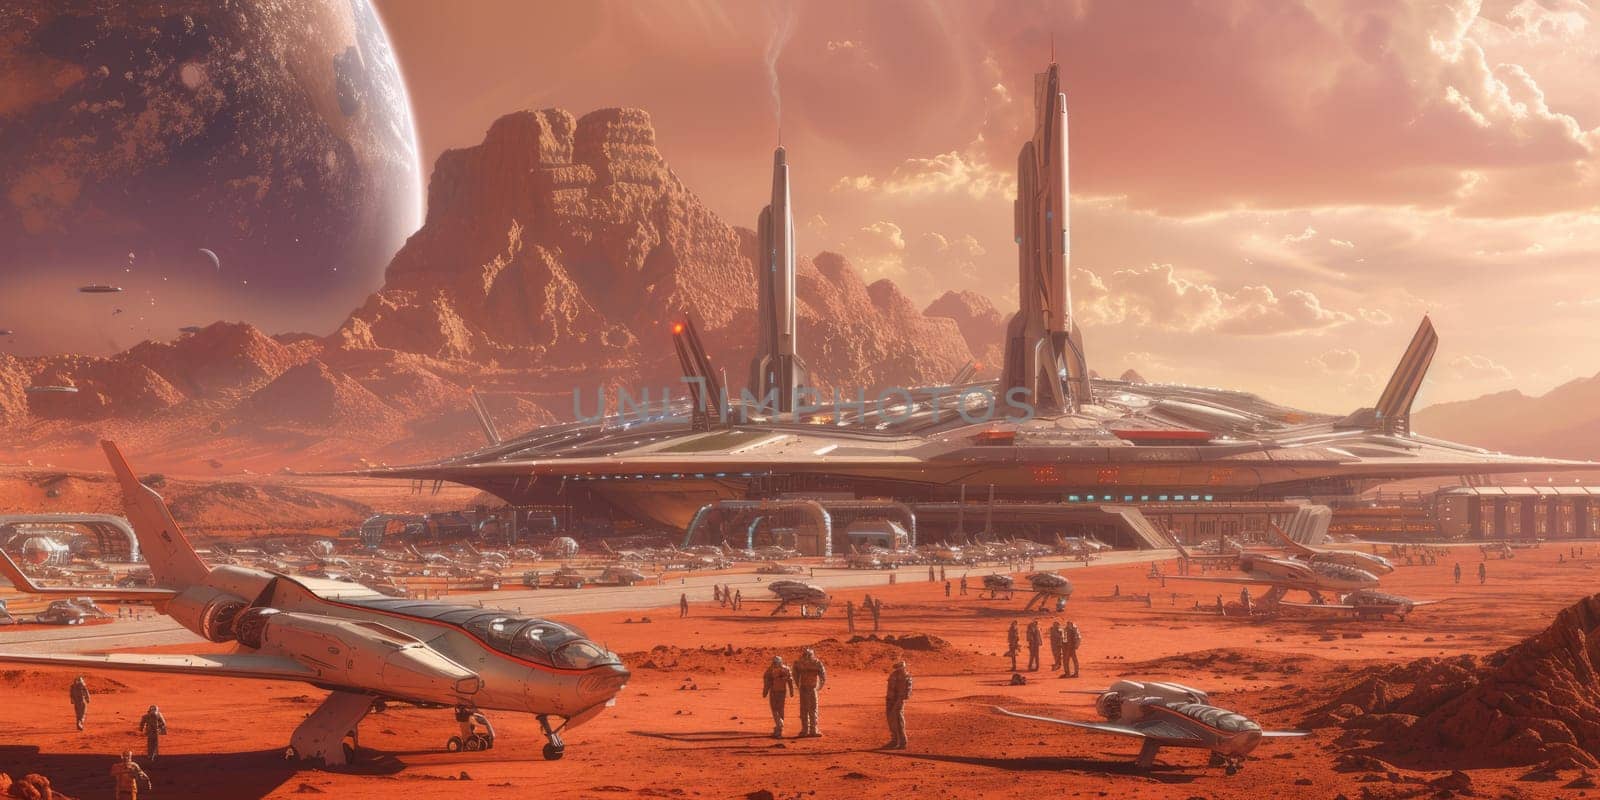 Futuristic Mars Spaceport with Starships. Resplendent. by biancoblue